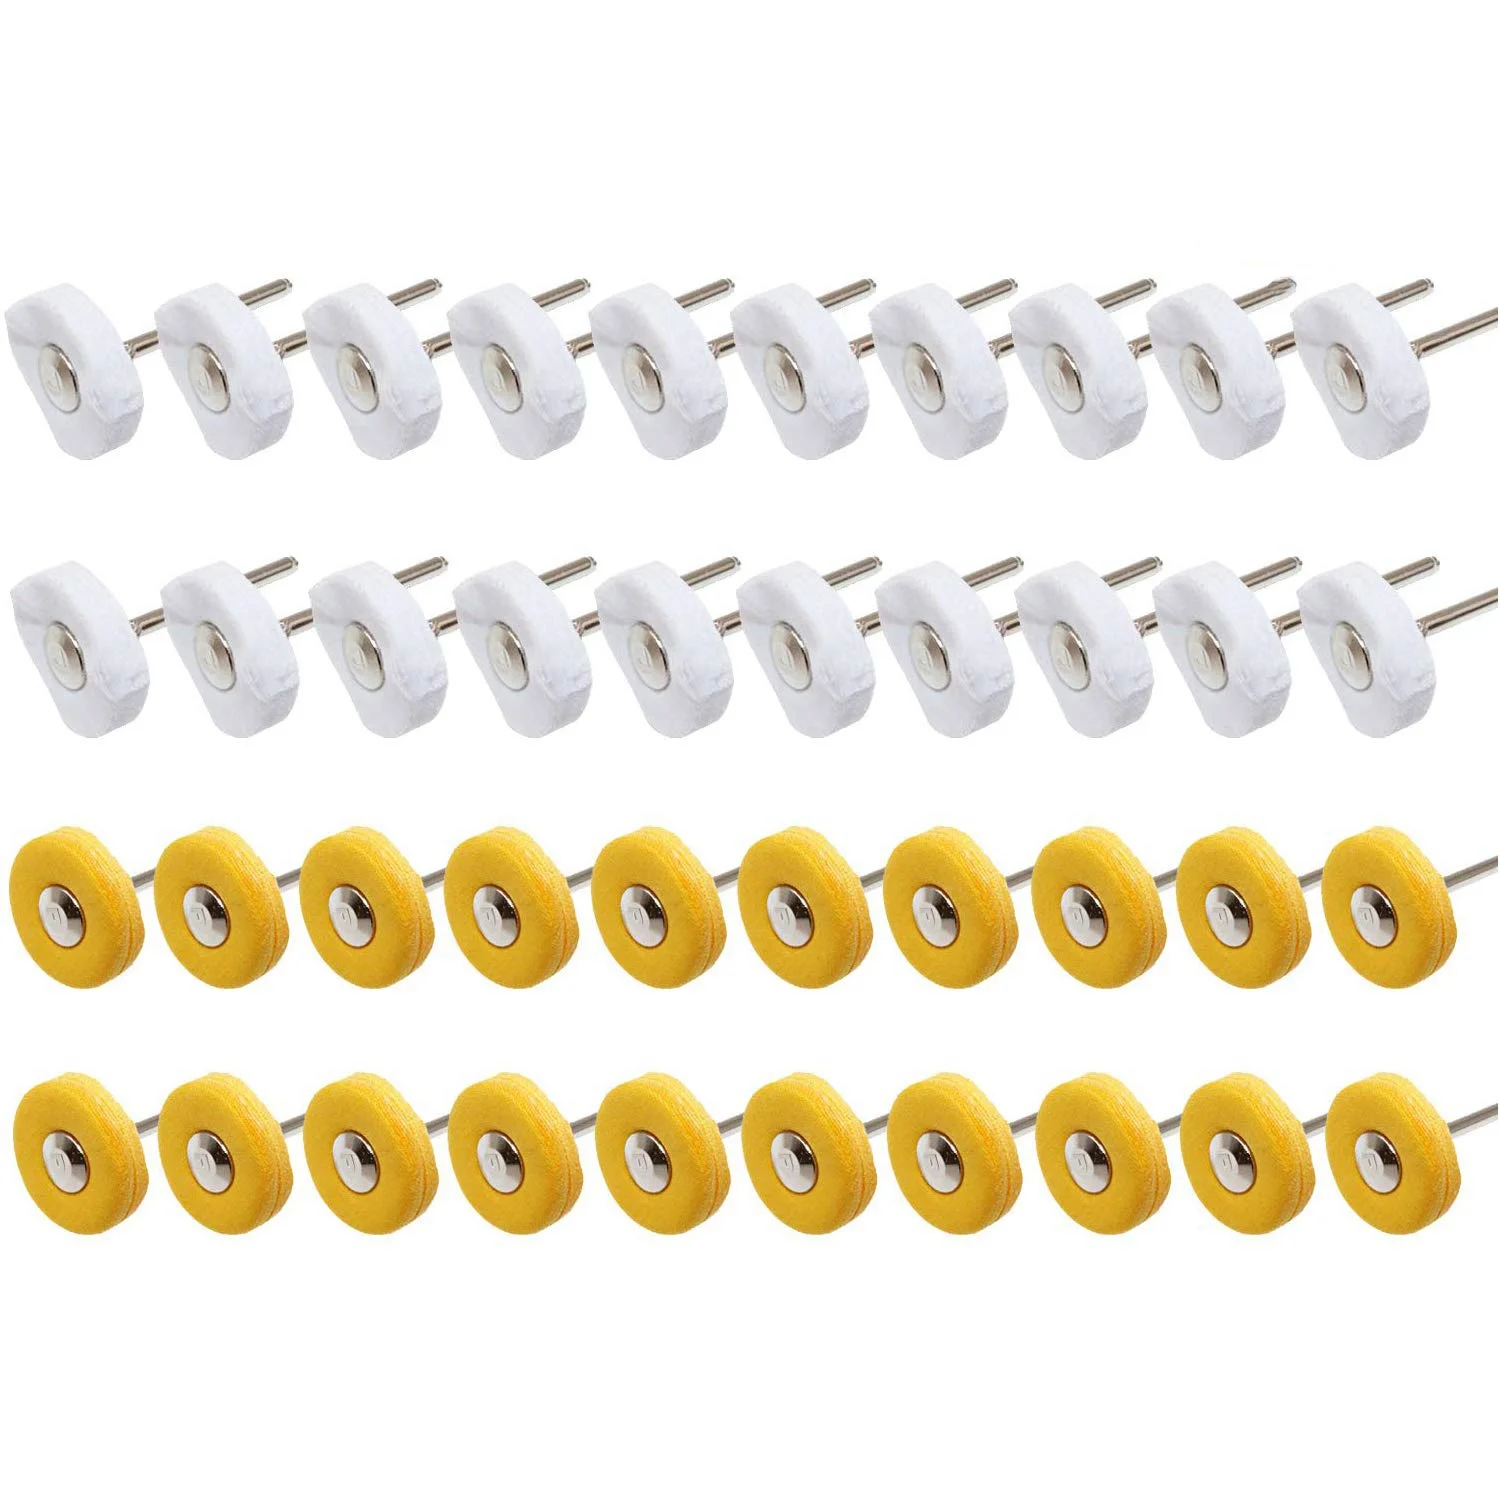 

40 Pieces Buffing Wheels for Polishing Buffer Wheel Watch Jewelry Polish Drill Tool Accessories 3mm Mandrel